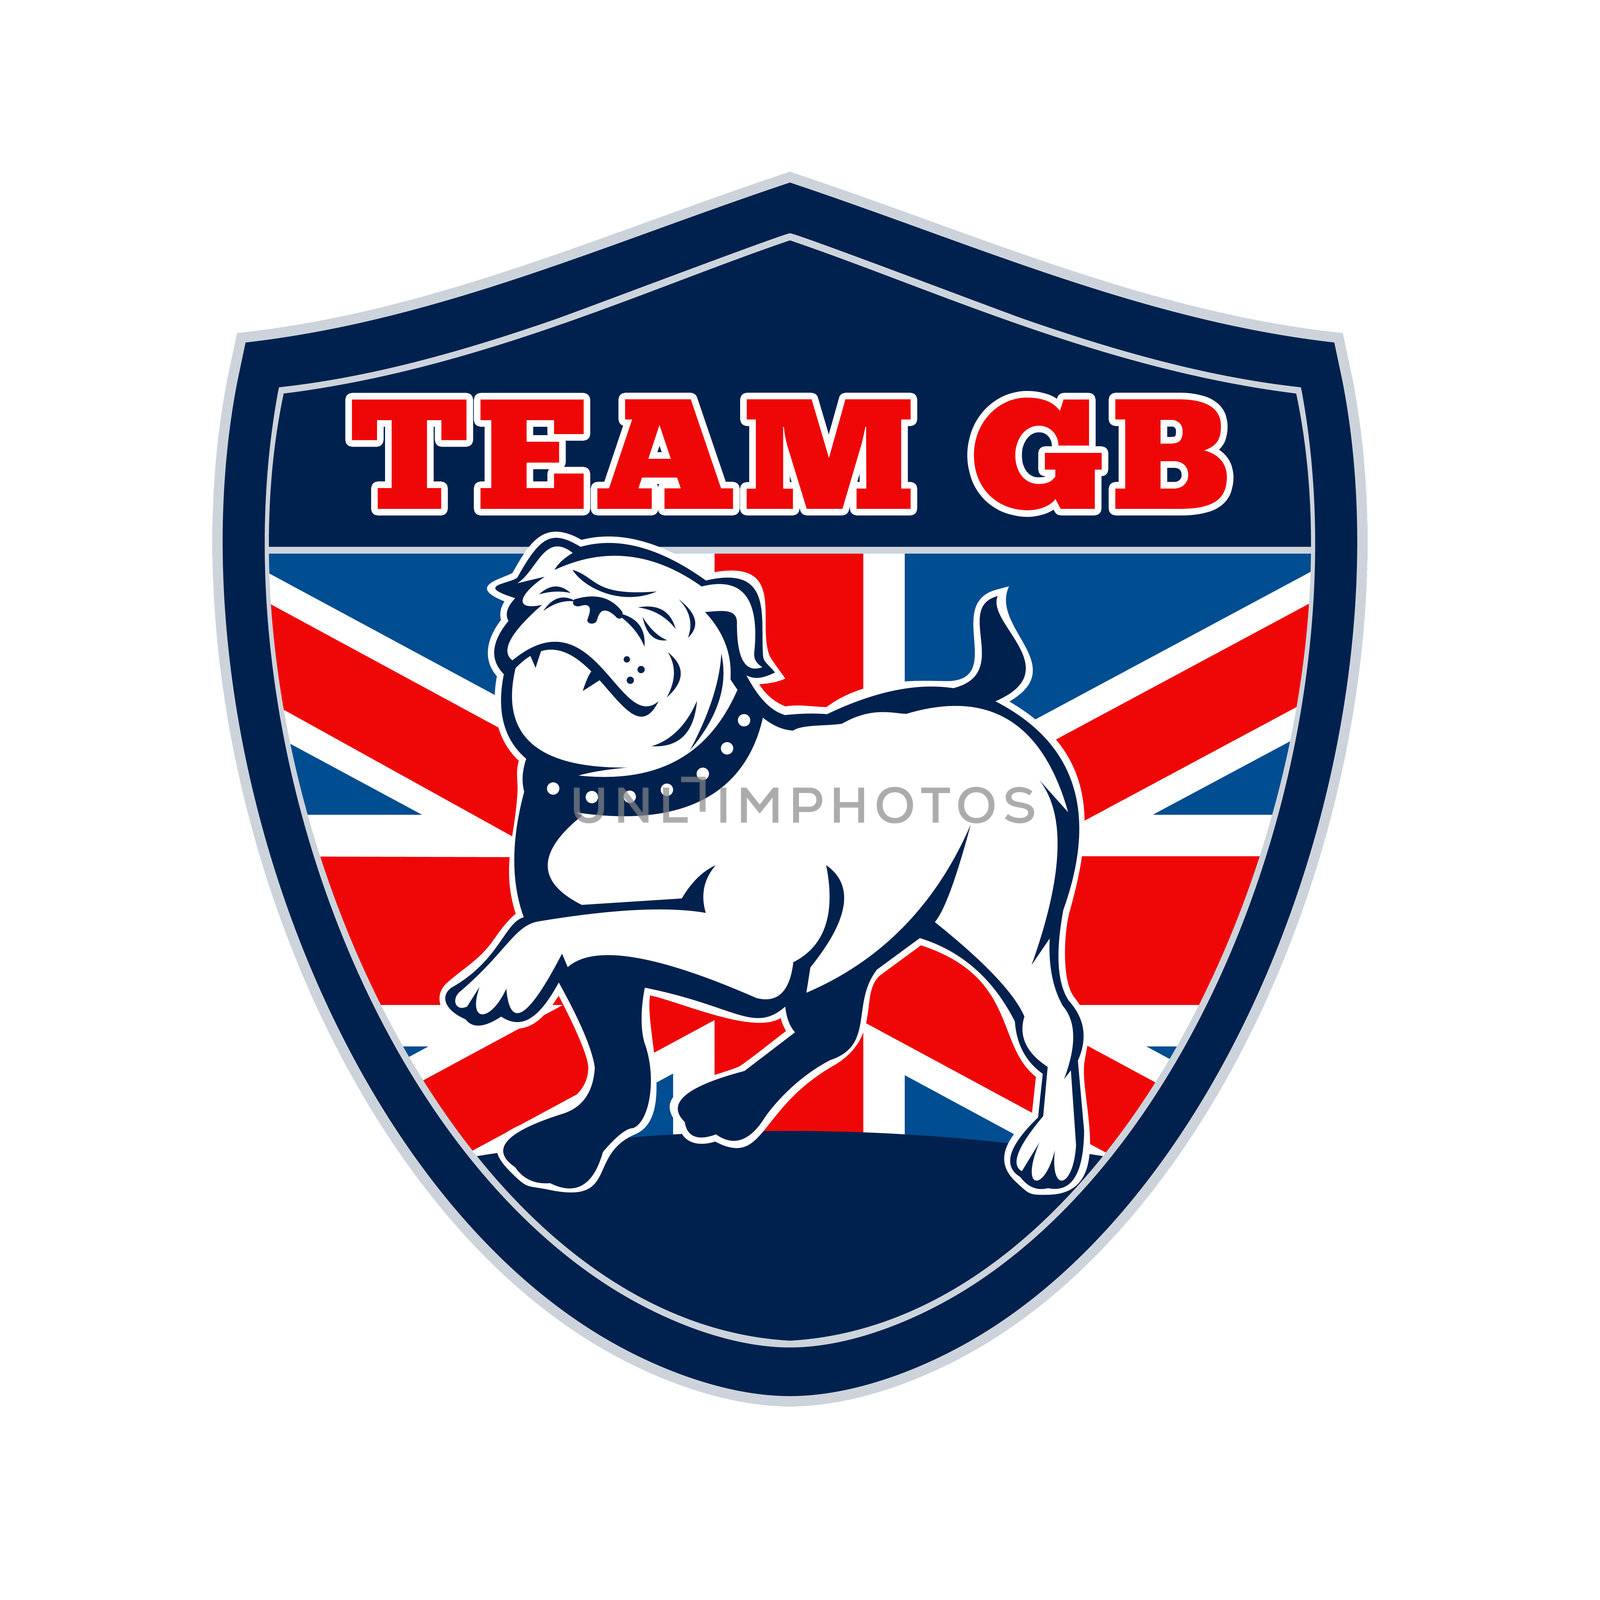 illustration of a Proud English bulldog marching with Great Britain or British flag in background set inside a shield with words "team gb" suitable for any sports team mascot